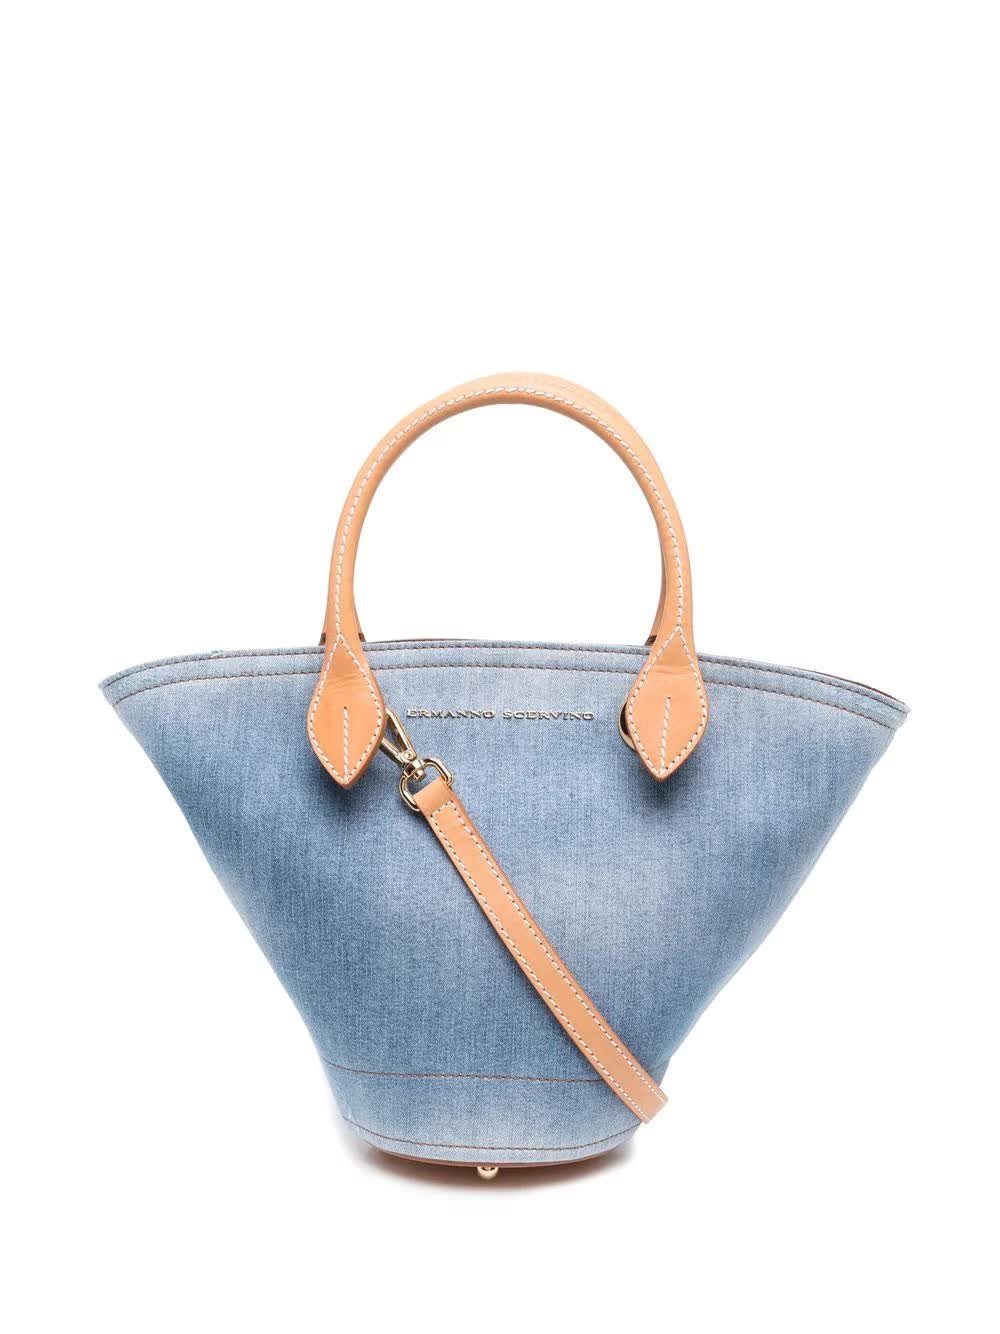 ERMANNO SCERVINO SMALL BLUE DENIM BUCKET BAG WITH LEATHER HANDLES,D383S433JNO 94037